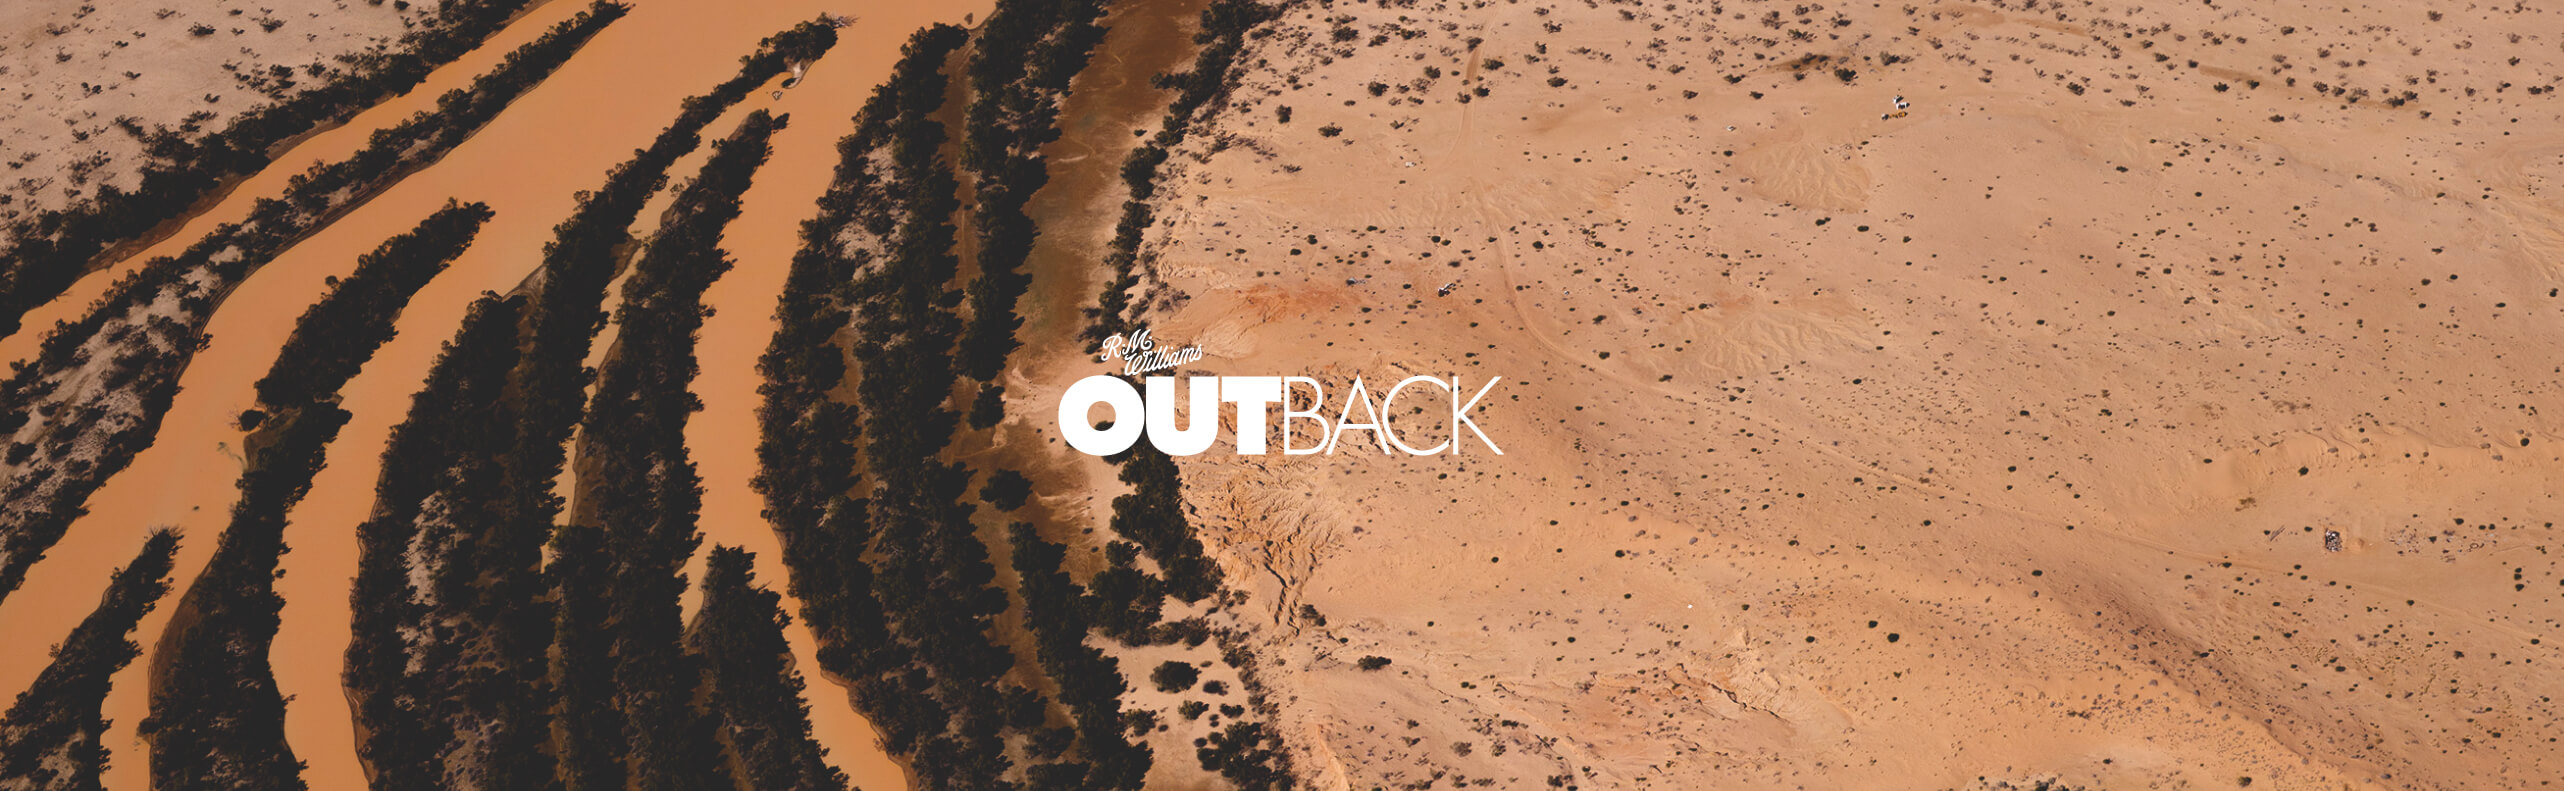 OUTBACK stories